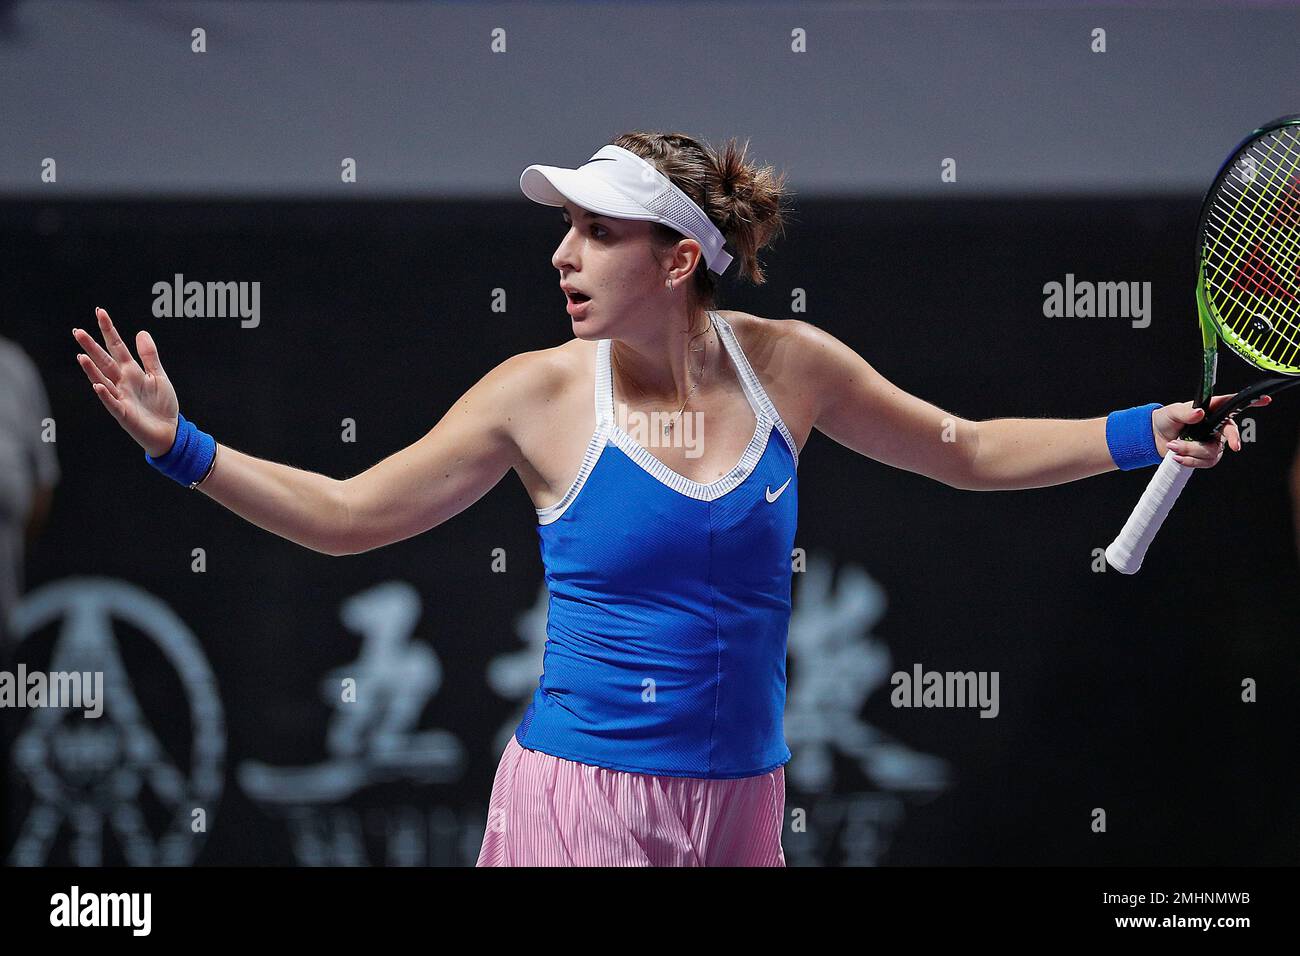 Belinda Bencic of Switzerland reacts after winning a set point against Kiki  Bertens of the Netherlands during the WTA Finals Tennis Tournament at the  Shenzhen Bay Sports Center in Shenzhen, China's Guangdong